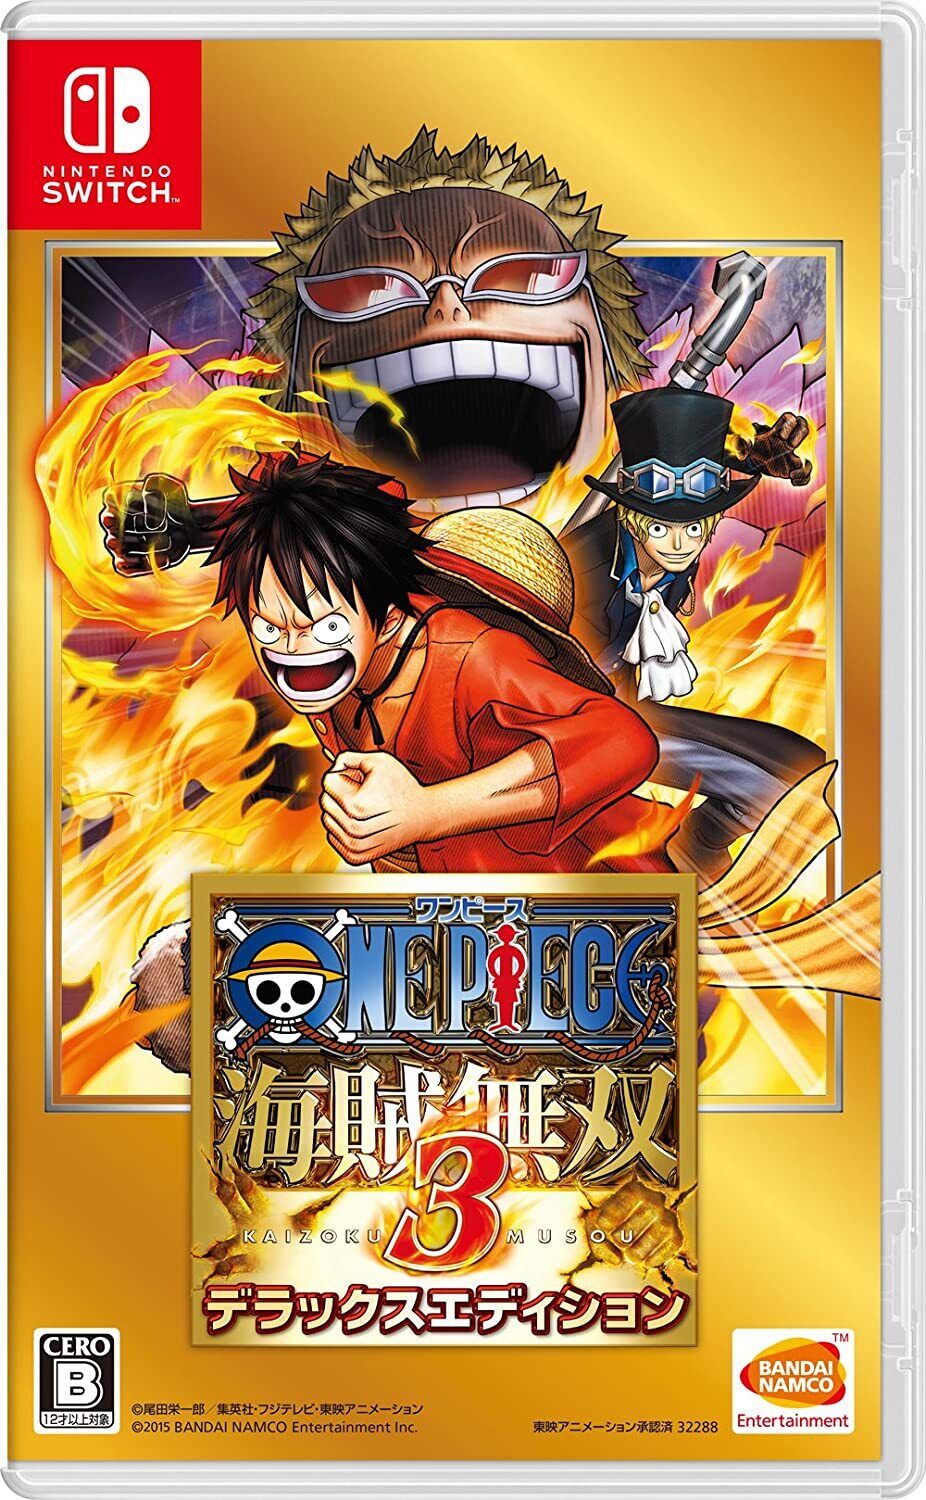 NINTENDO SWITCH One Piece Pirate Warriors 3 Deluxe Edition Nintendo Switch